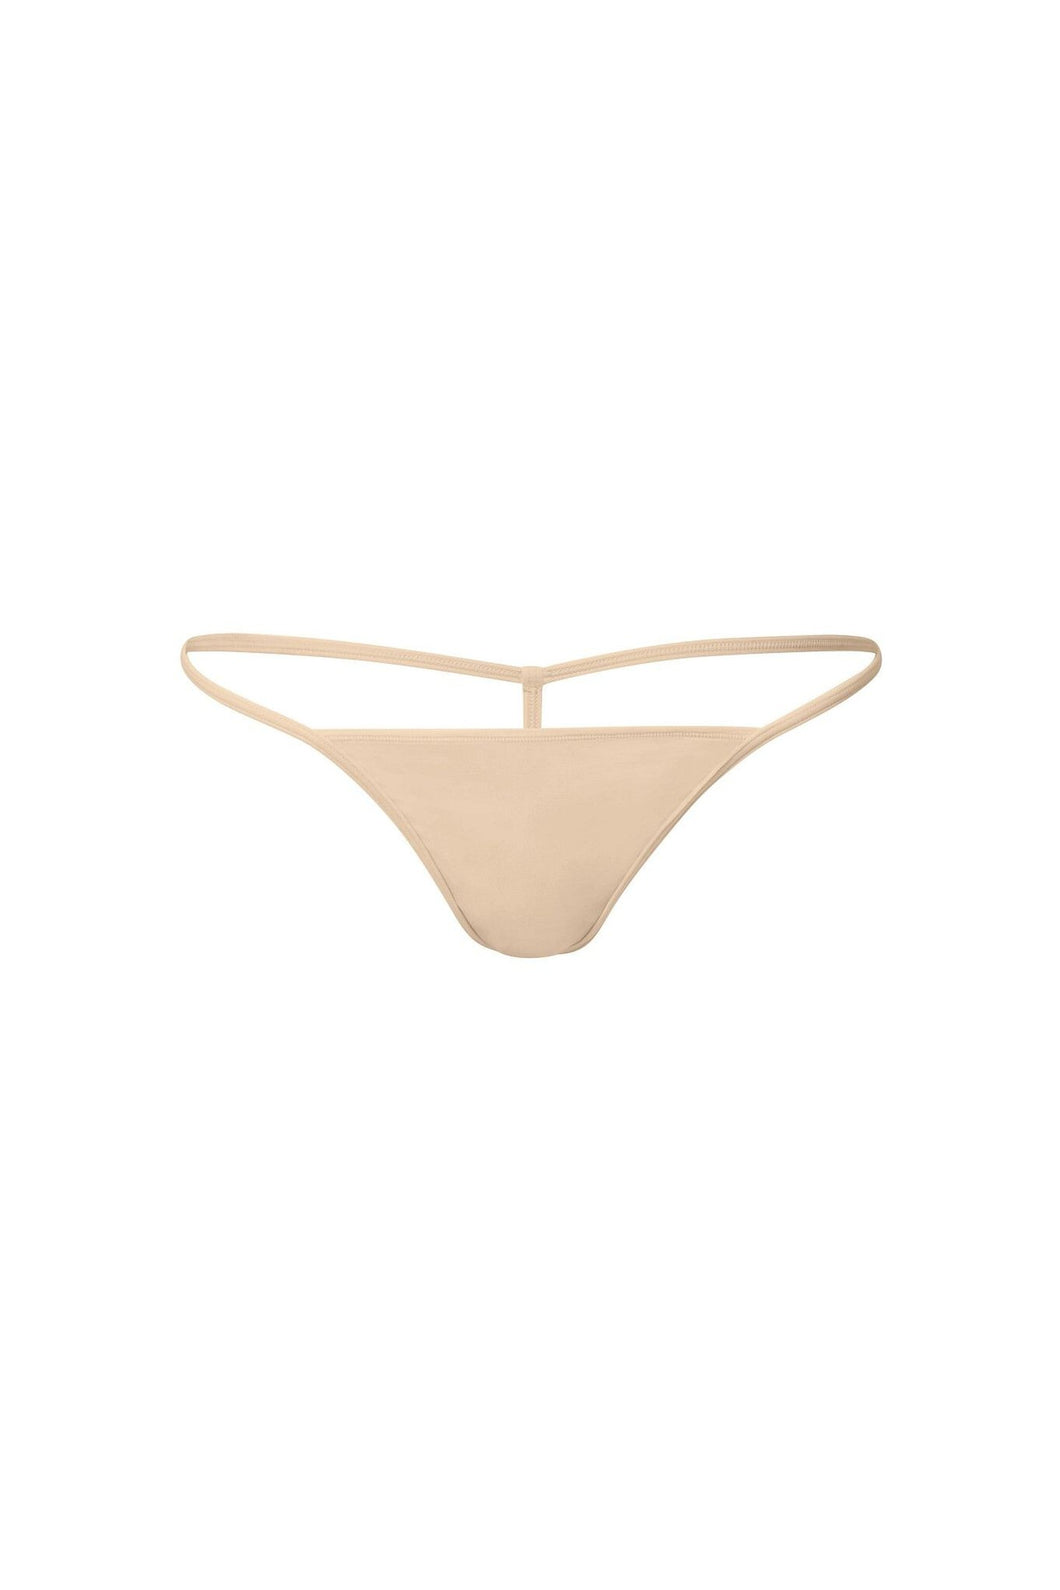 nueskin Irina No-Cut G-String in color Dawn and shape thong